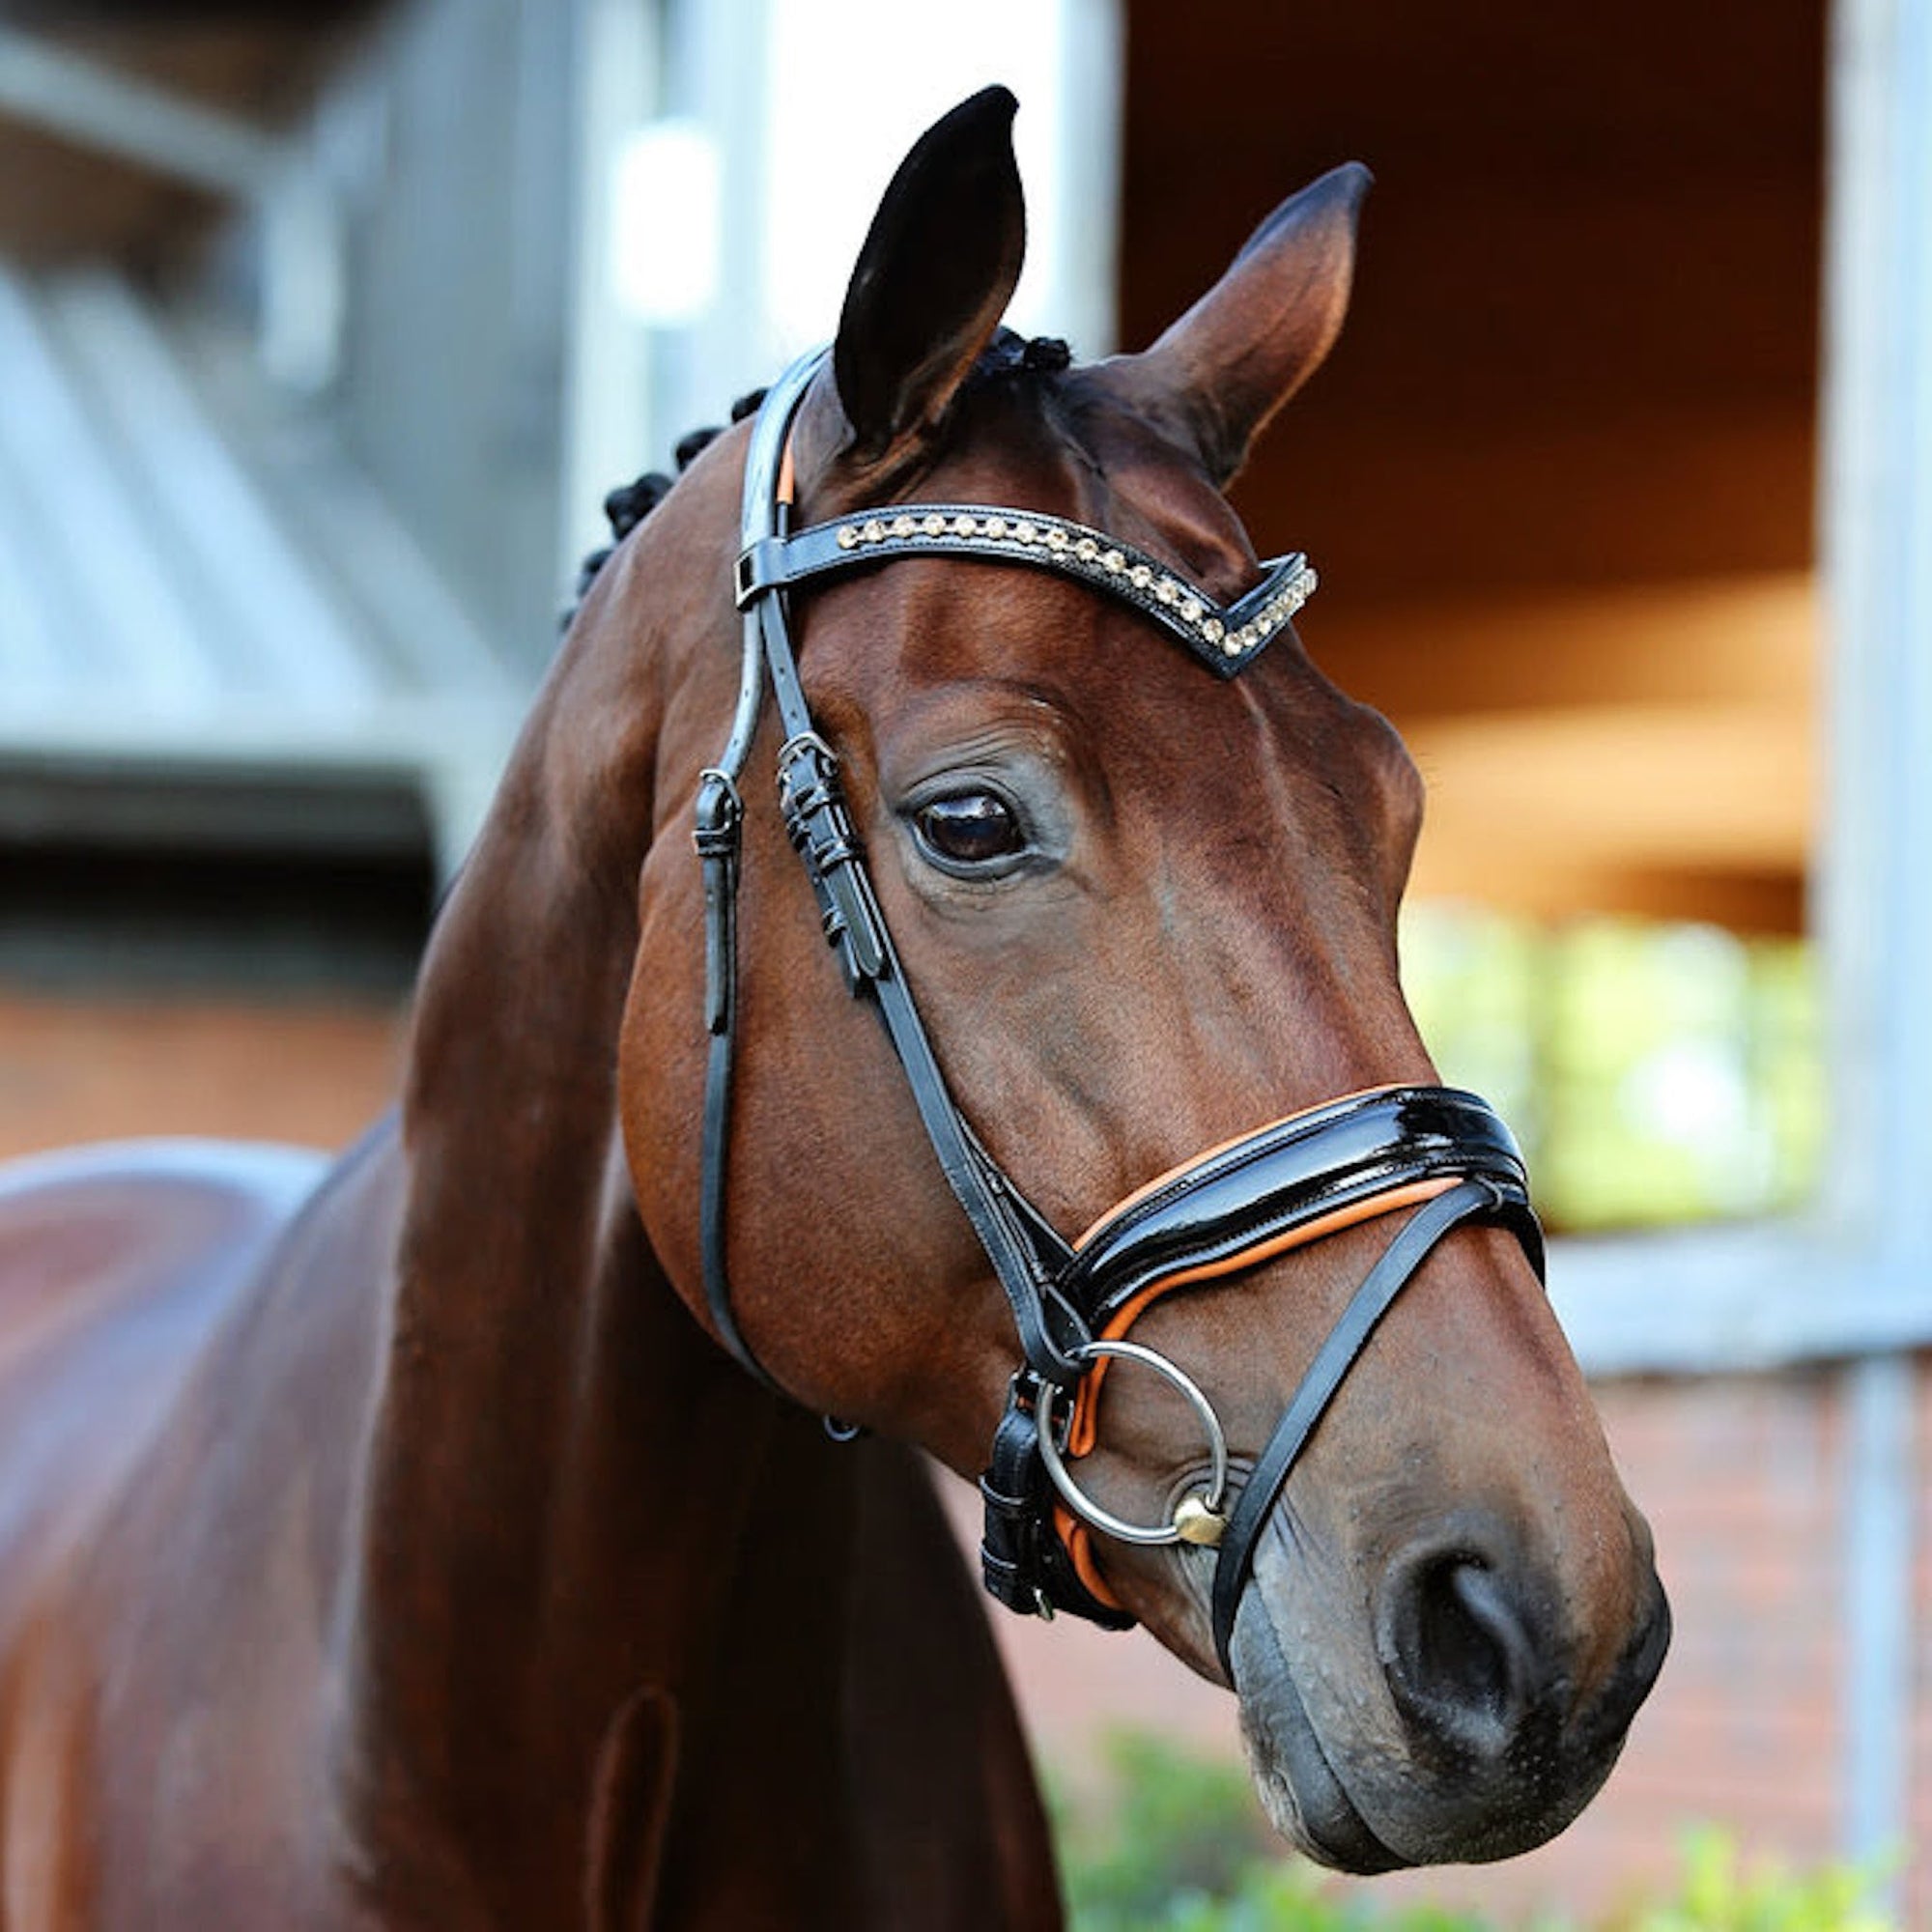 Bay horse wearing black patent leather bridle with orange details.